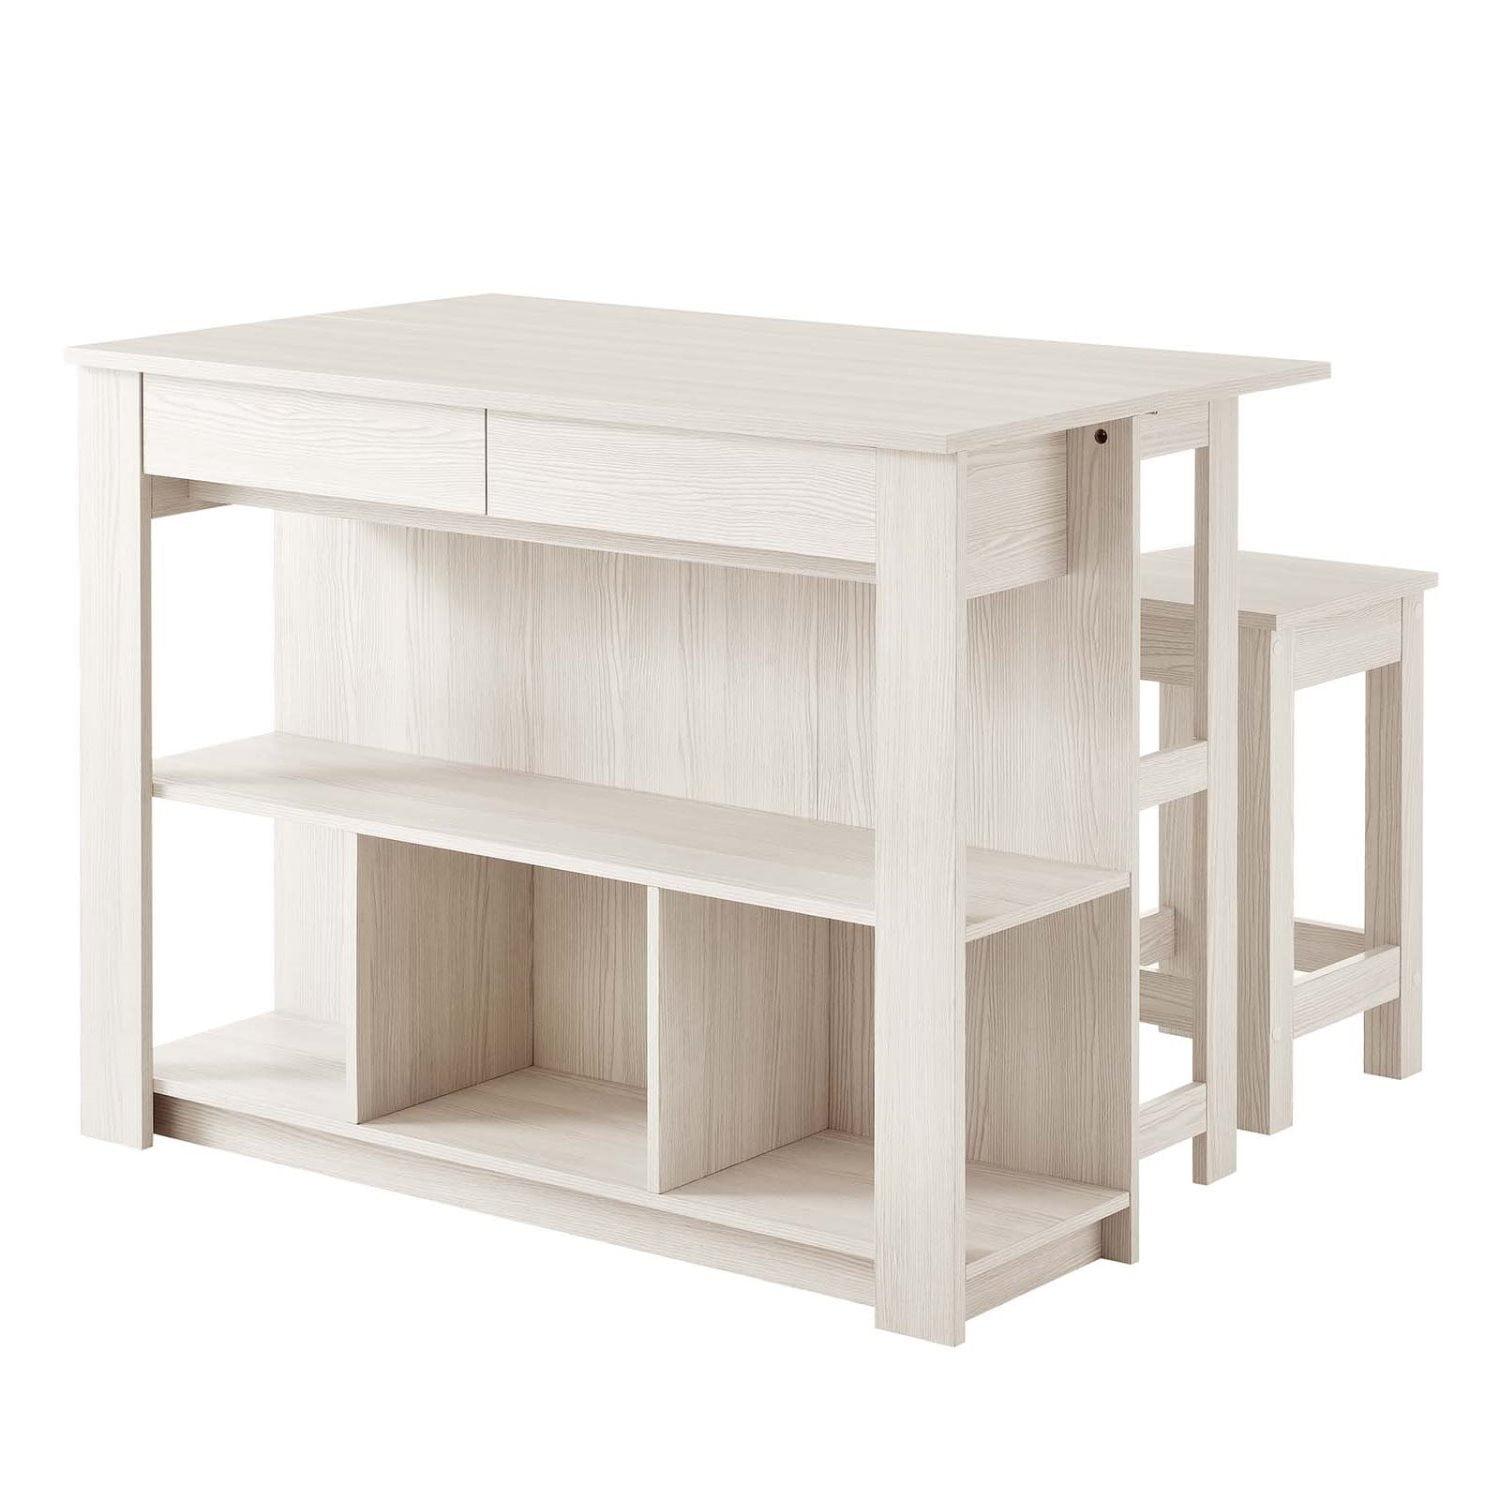 Meadowbrook White 3-Piece Kitchen Island Set with Stools